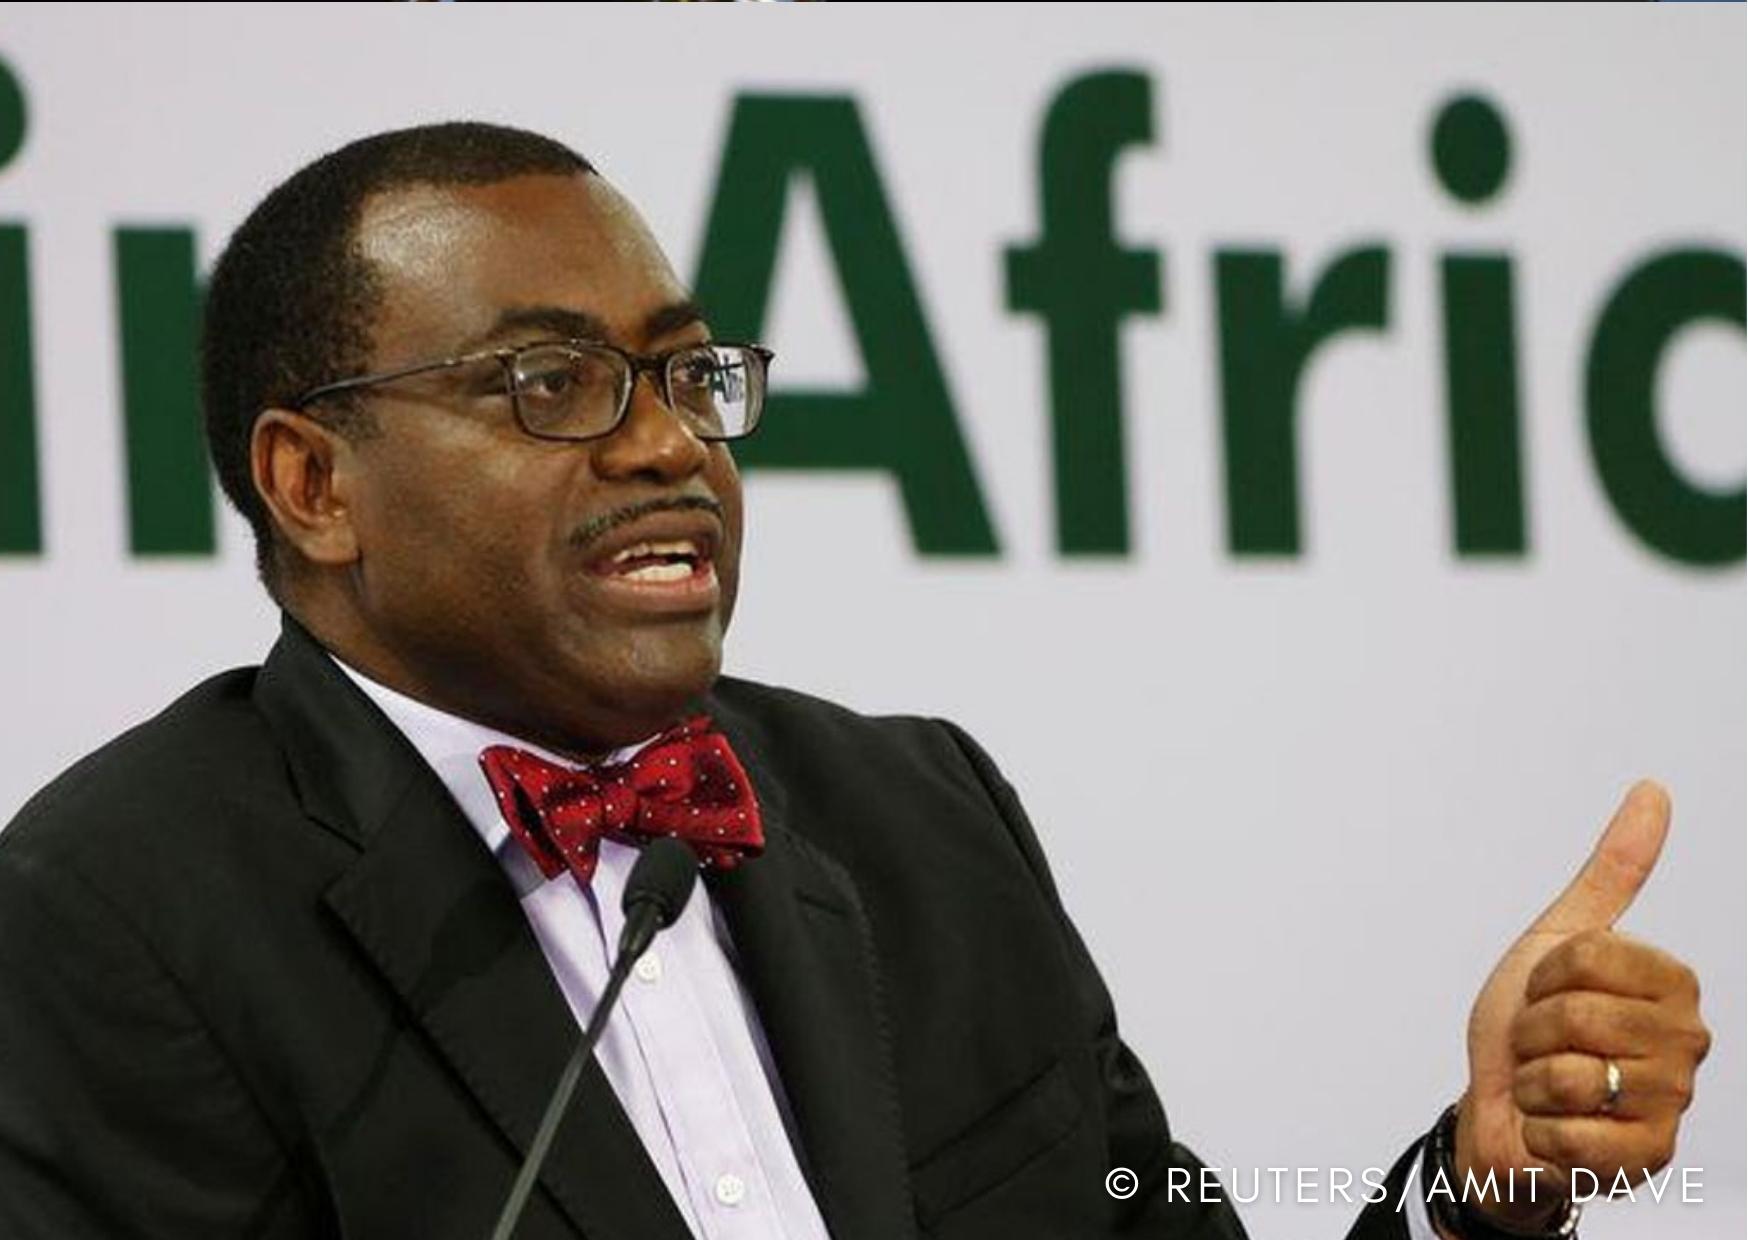 Africa Economic Outlook 2021: AfDB, debt and vaccine injustice 썸네일